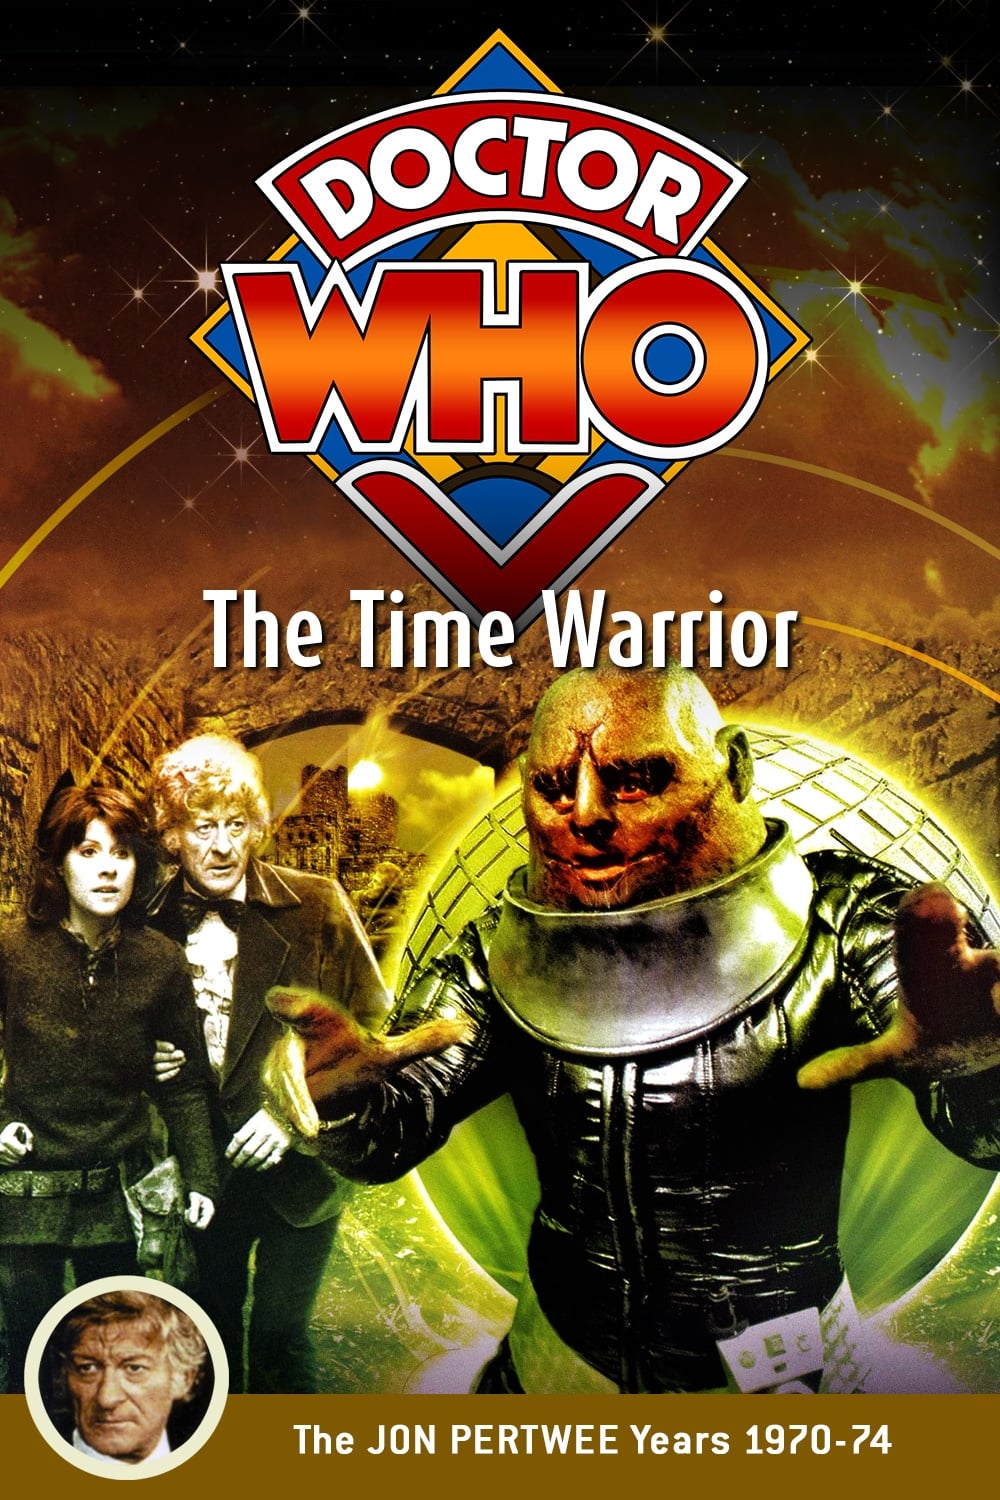 Doctor Who: The Time Warrior (1974)